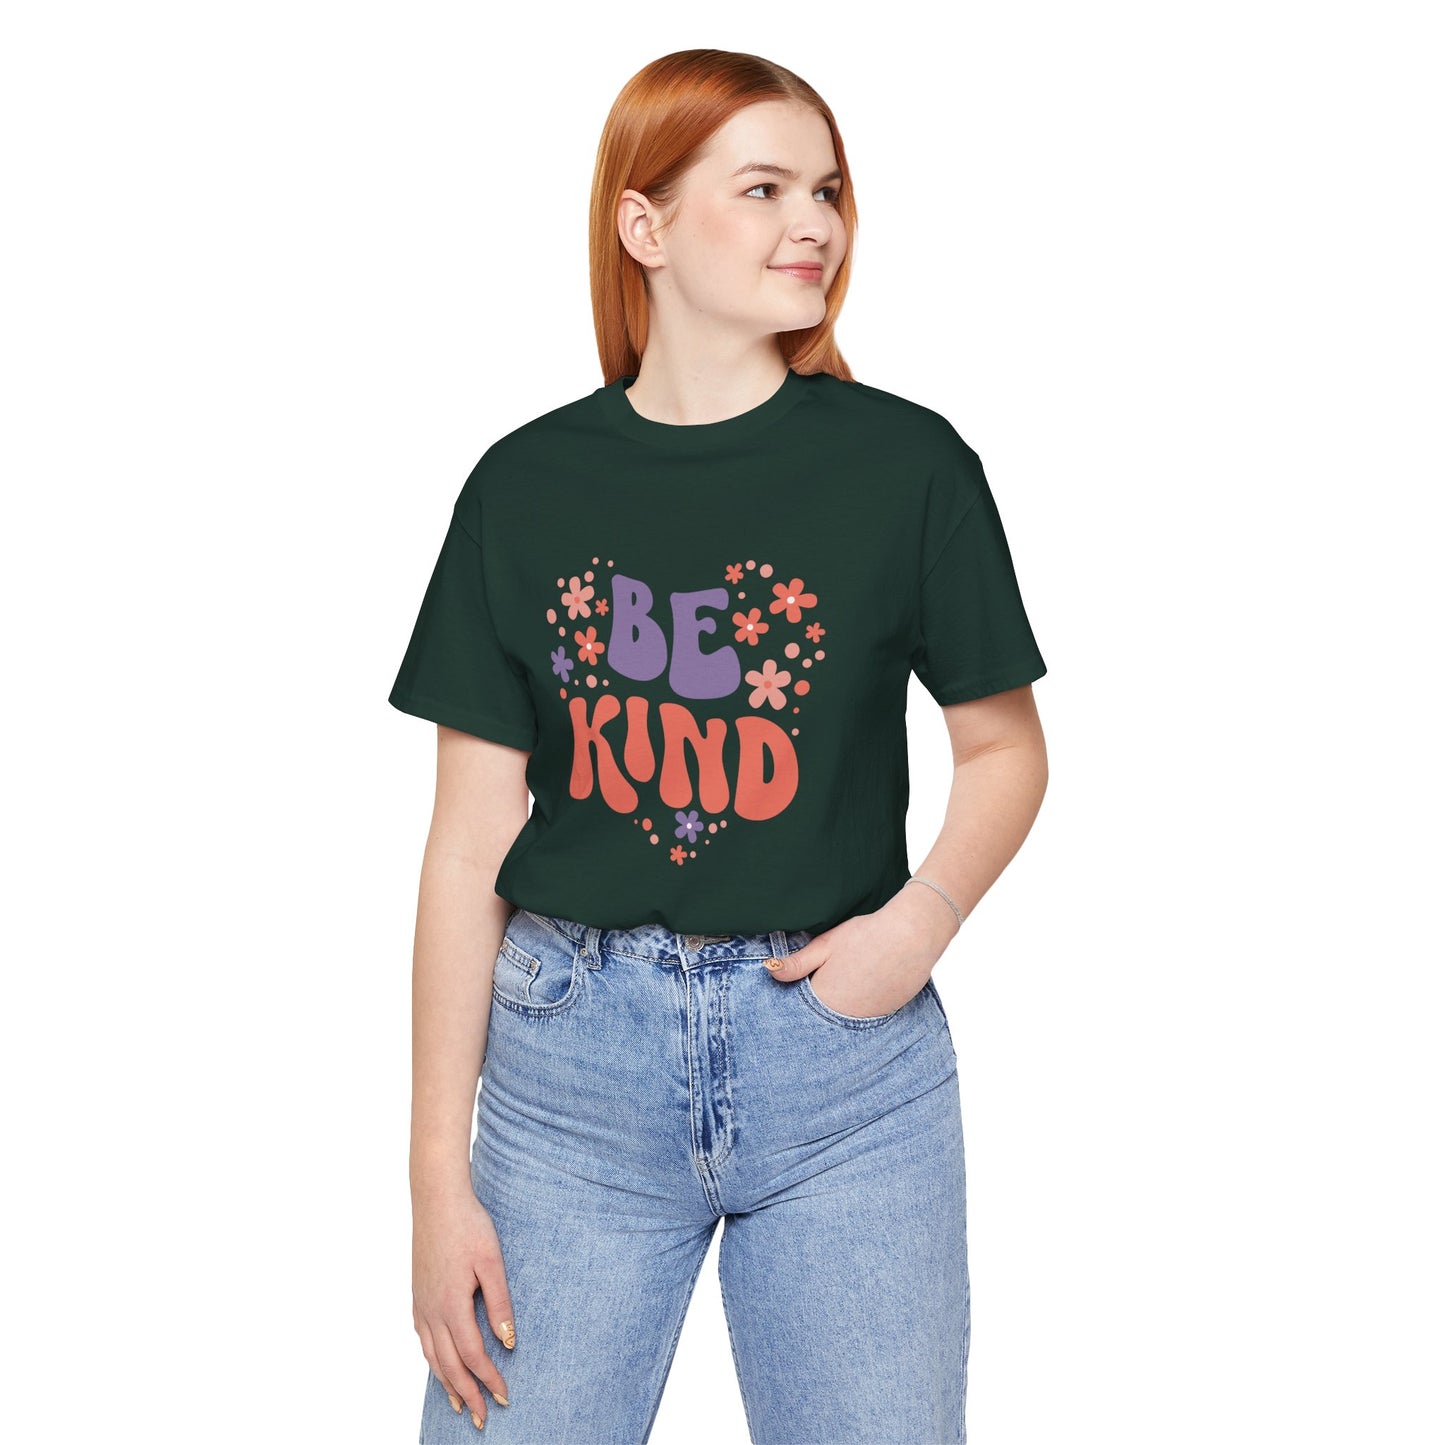 'Be Kind' Retro Tee | 7+ Color Options